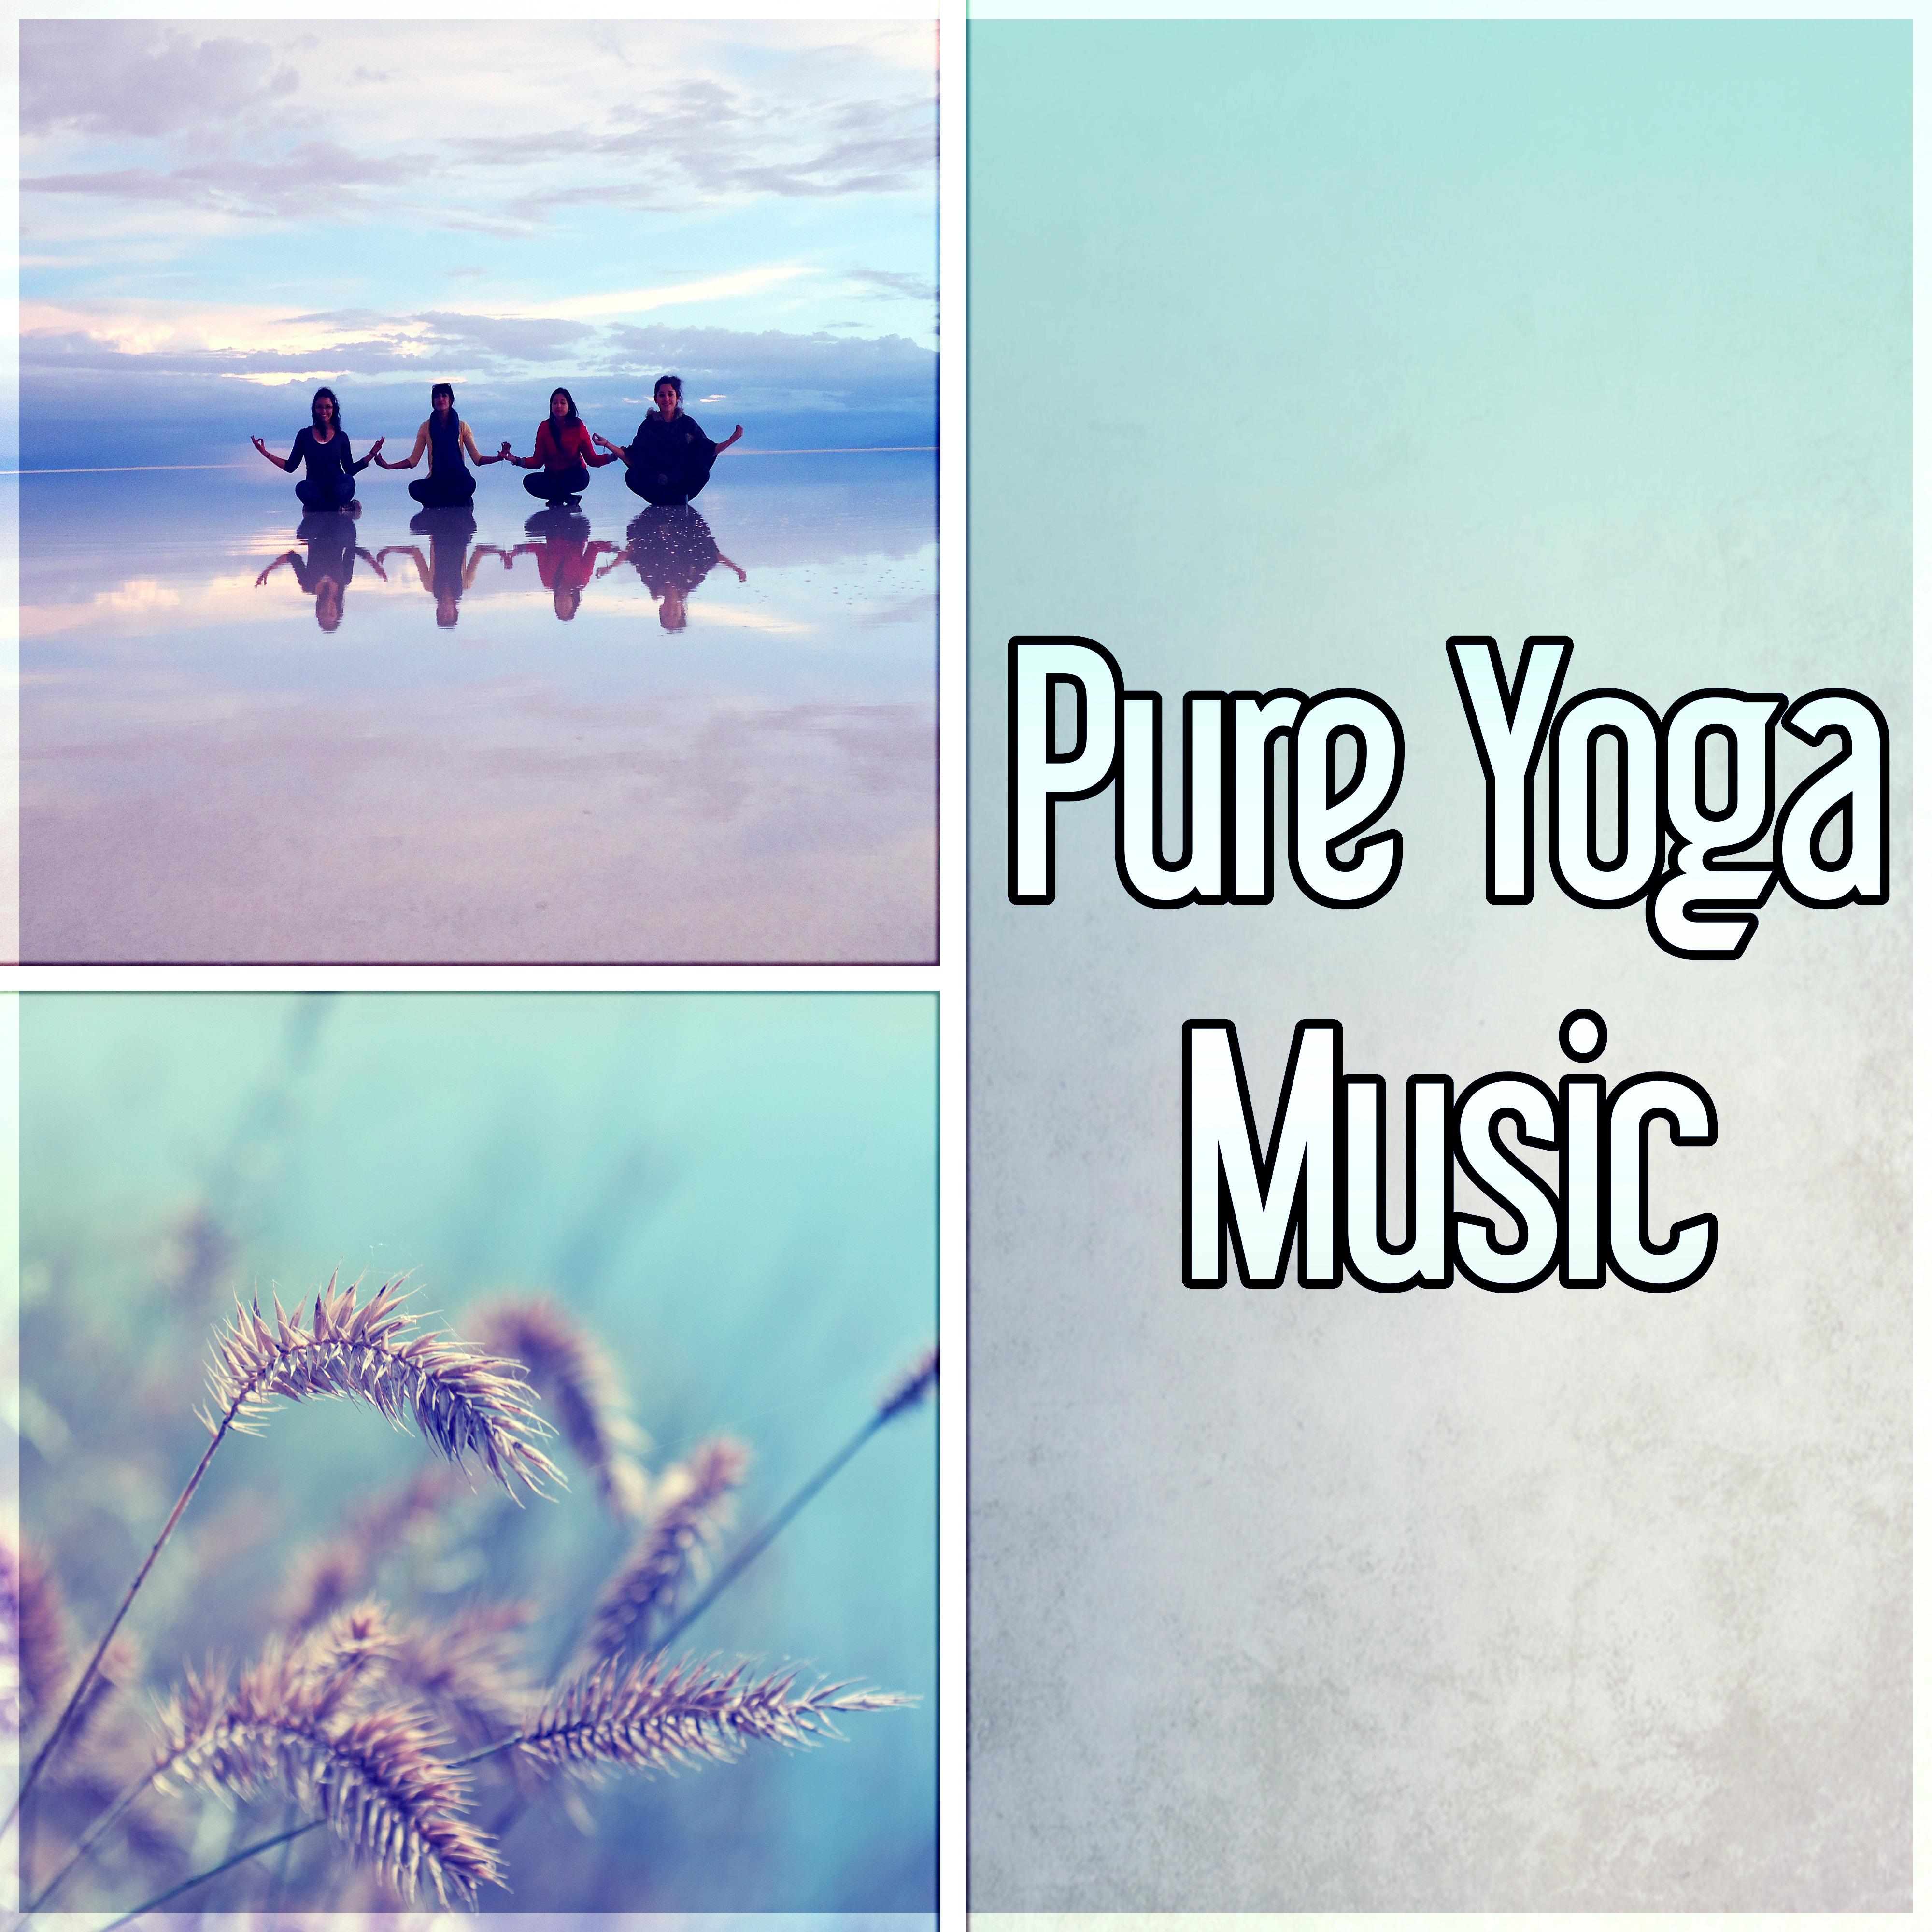 Pure Yoga Music - Pan Flute Sounds for Healing Massage, Peaceful Music for Deep Zen Meditation & Well Being, Instrumental Relaxing Music, New Age, Yoga Background Music